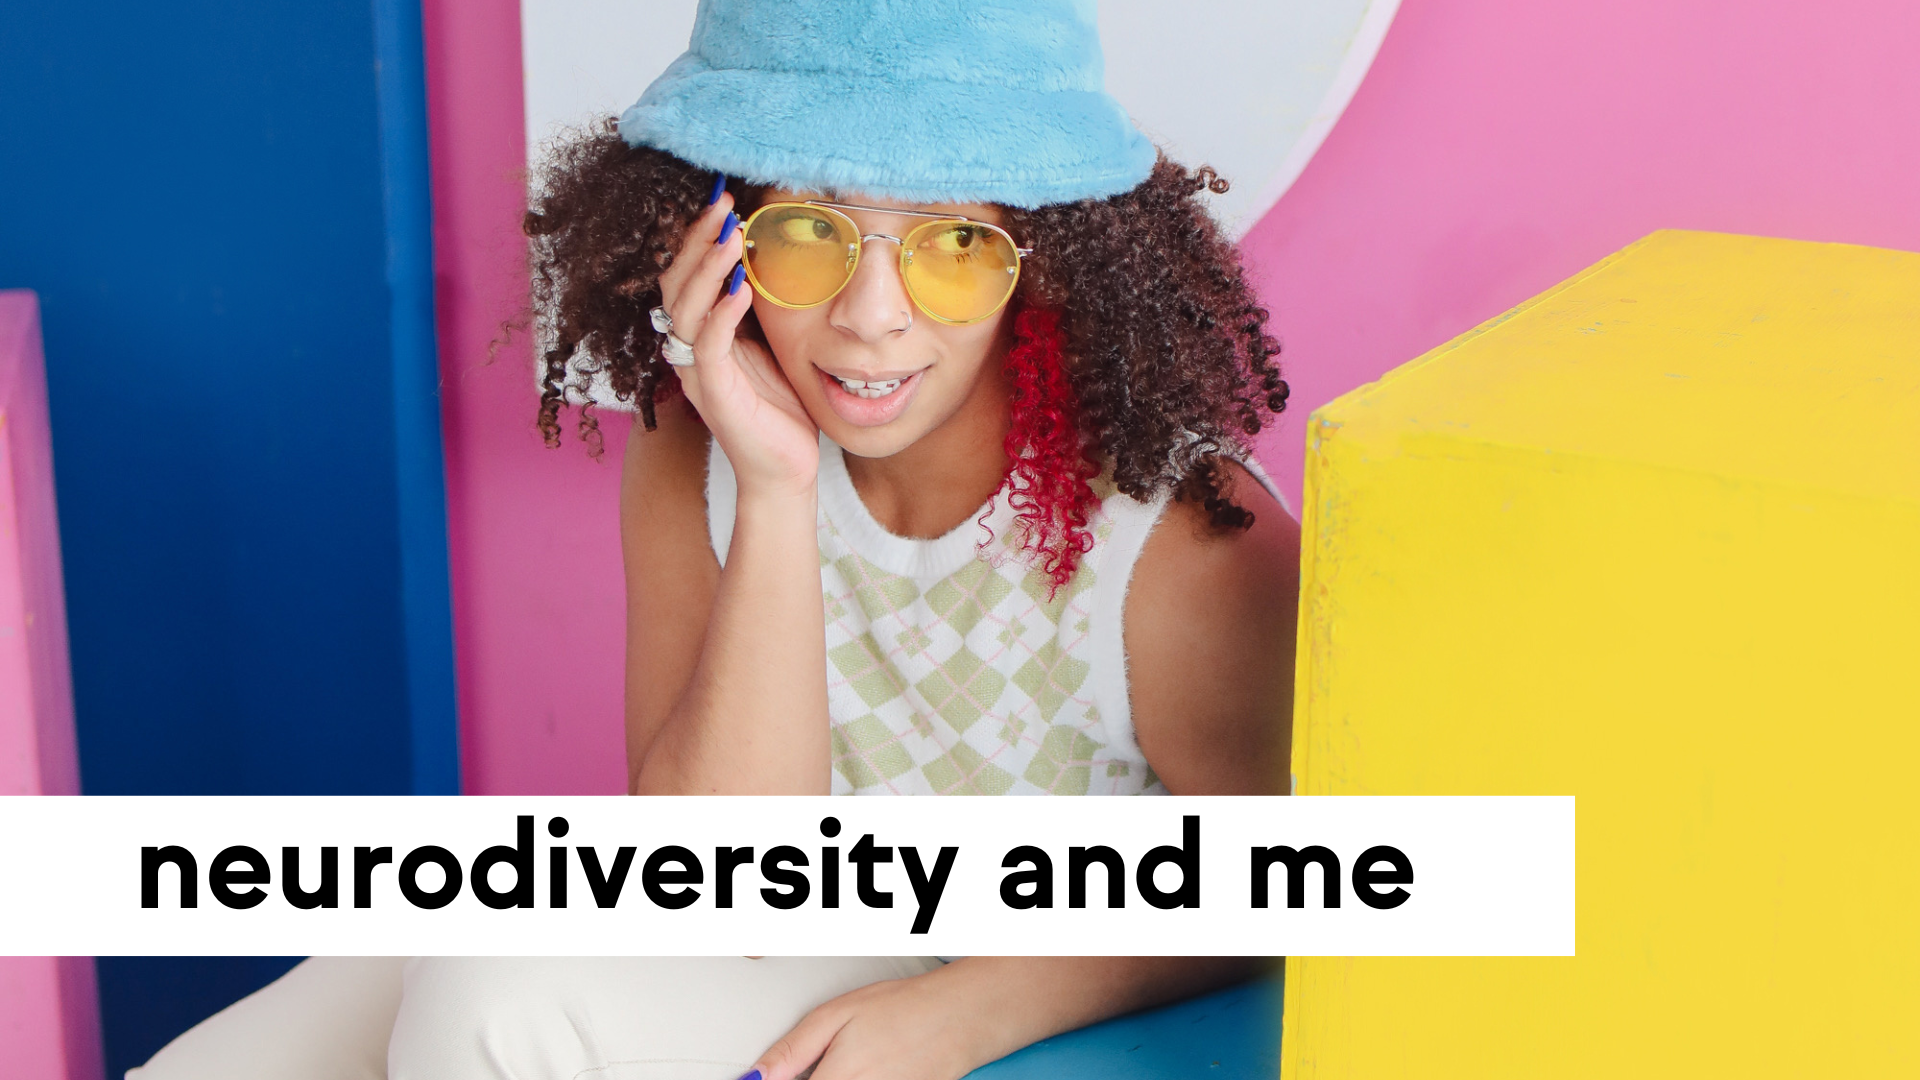 Ethnically ambiguous and gender-fluid person sitting with their head rested on the palm. Behind them is a blue, pink, and yellow background. The words "neurodiversity and me" are displayed with black colored text, in front of a white background.